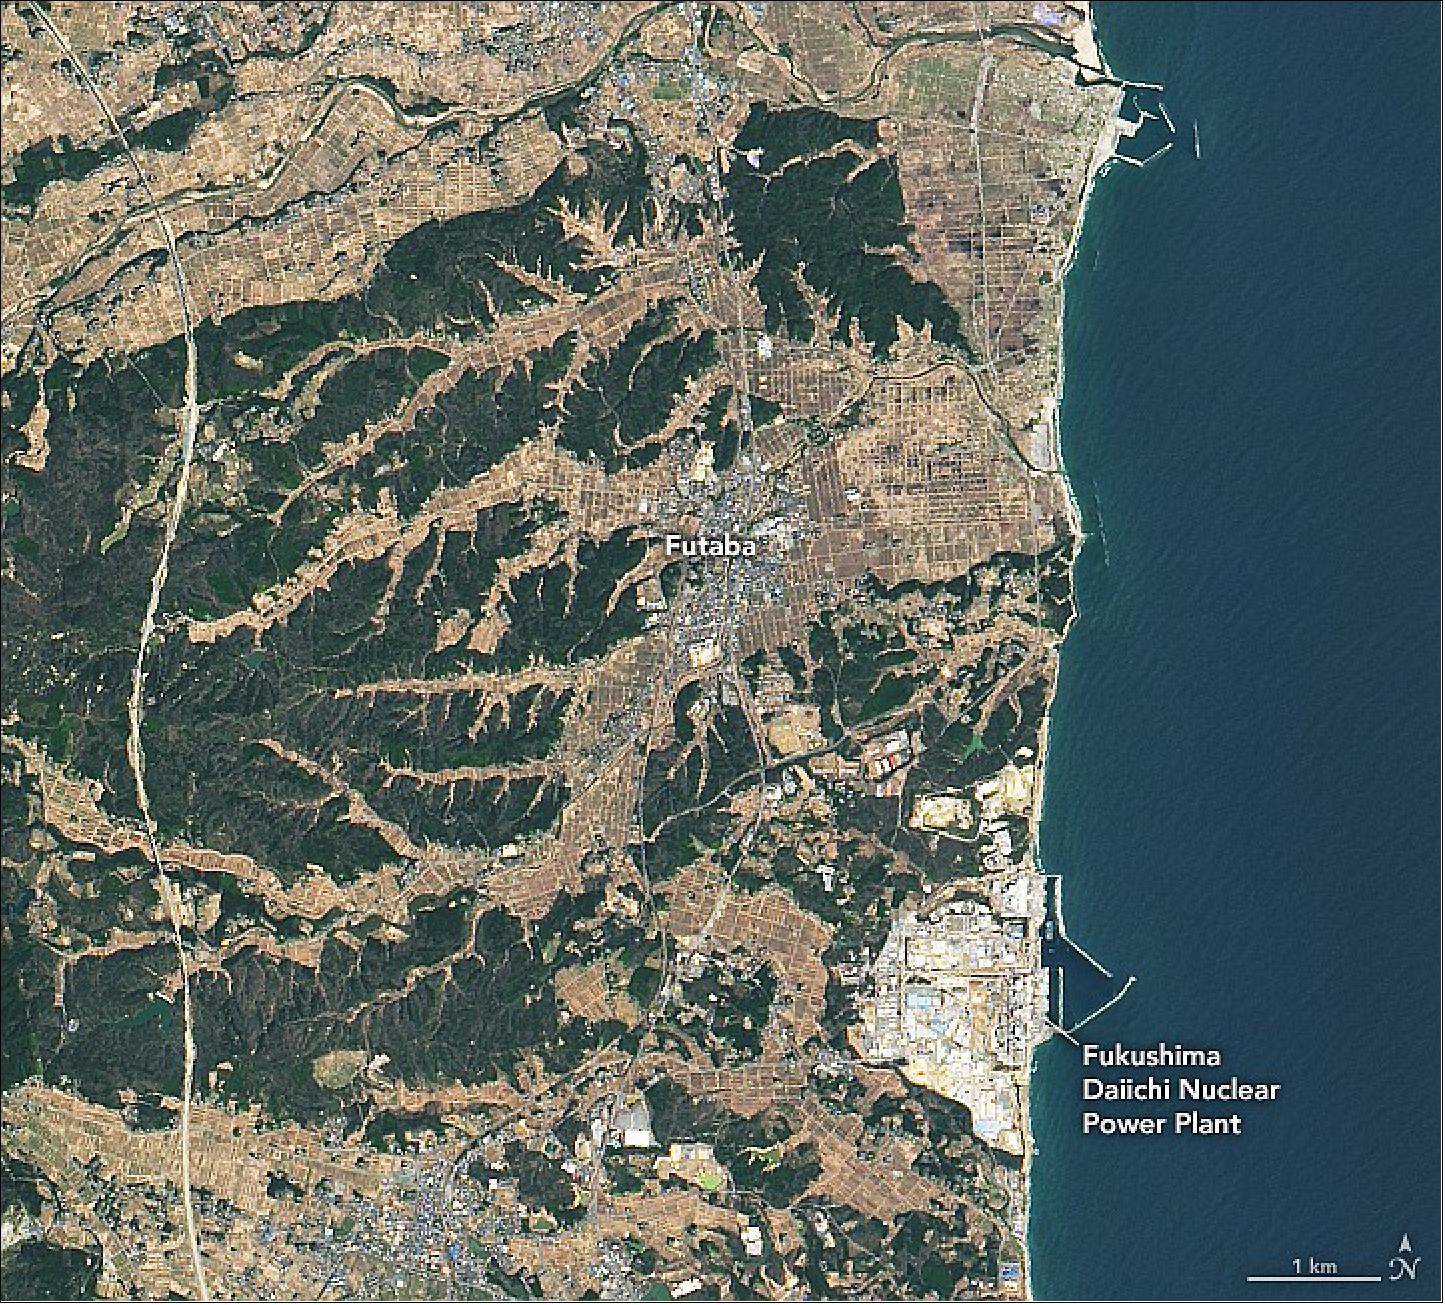 Figure 59: A Landsat-8 image of Fukushima on 13 April 2014, three years after the tsunami event in March 2011 (image credit: NASA Earth Observatory)